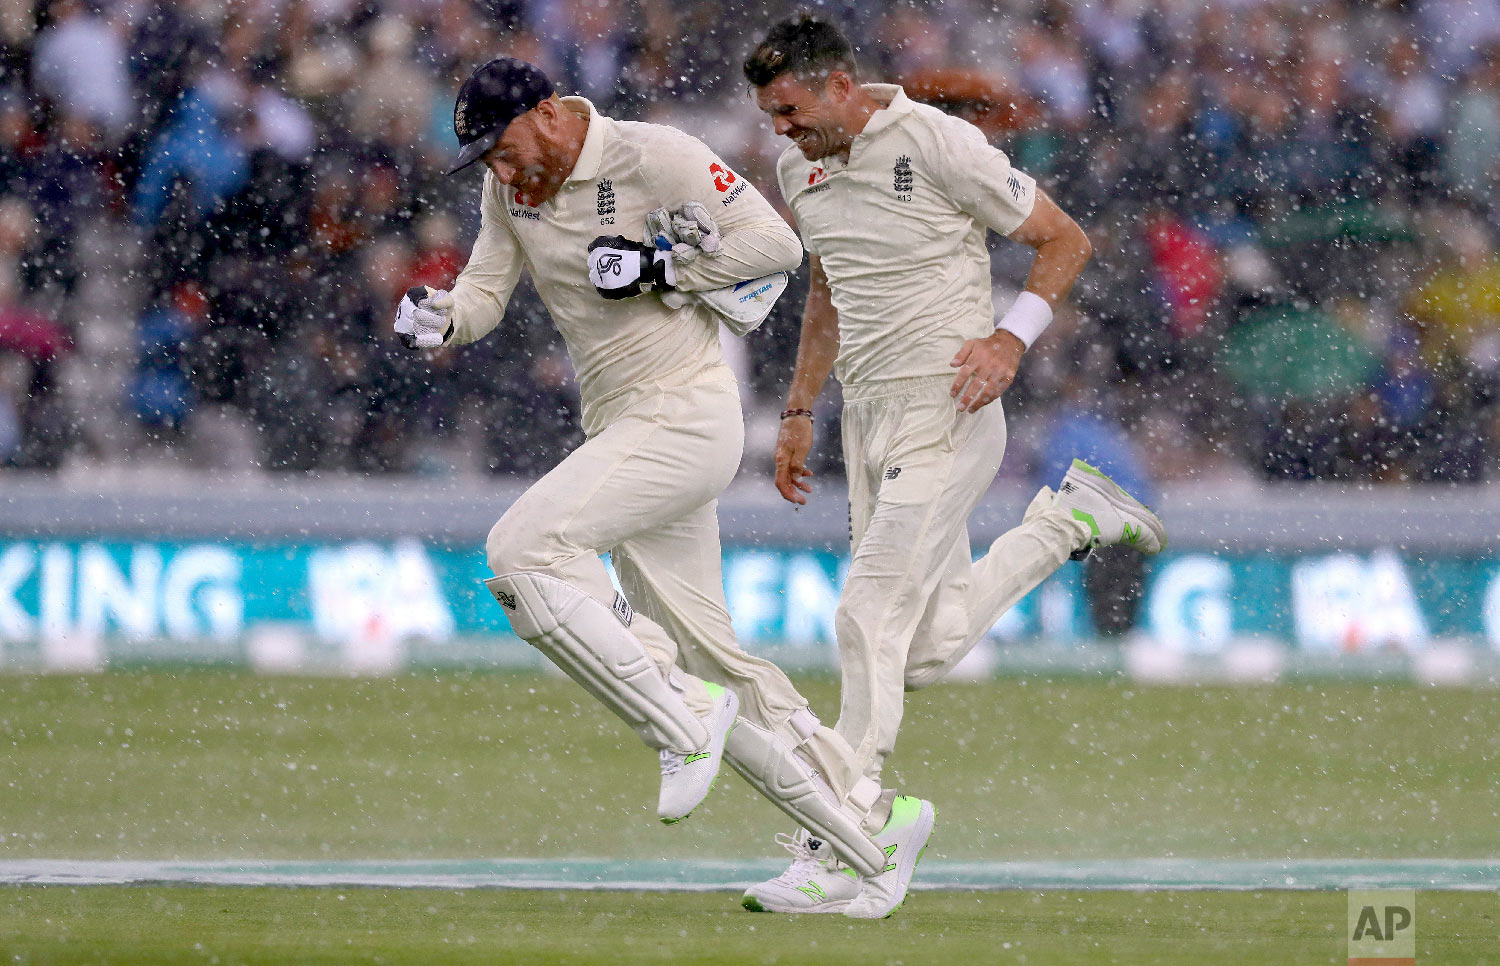  England's Jonny Bairstow and England's James Anderson run off the pitch as sudden heavy rain starts during the second day of the second test match between England and India at Lord's cricket ground in London on Aug. 10, 2018. (AP Photo/Kirsty Wiggle